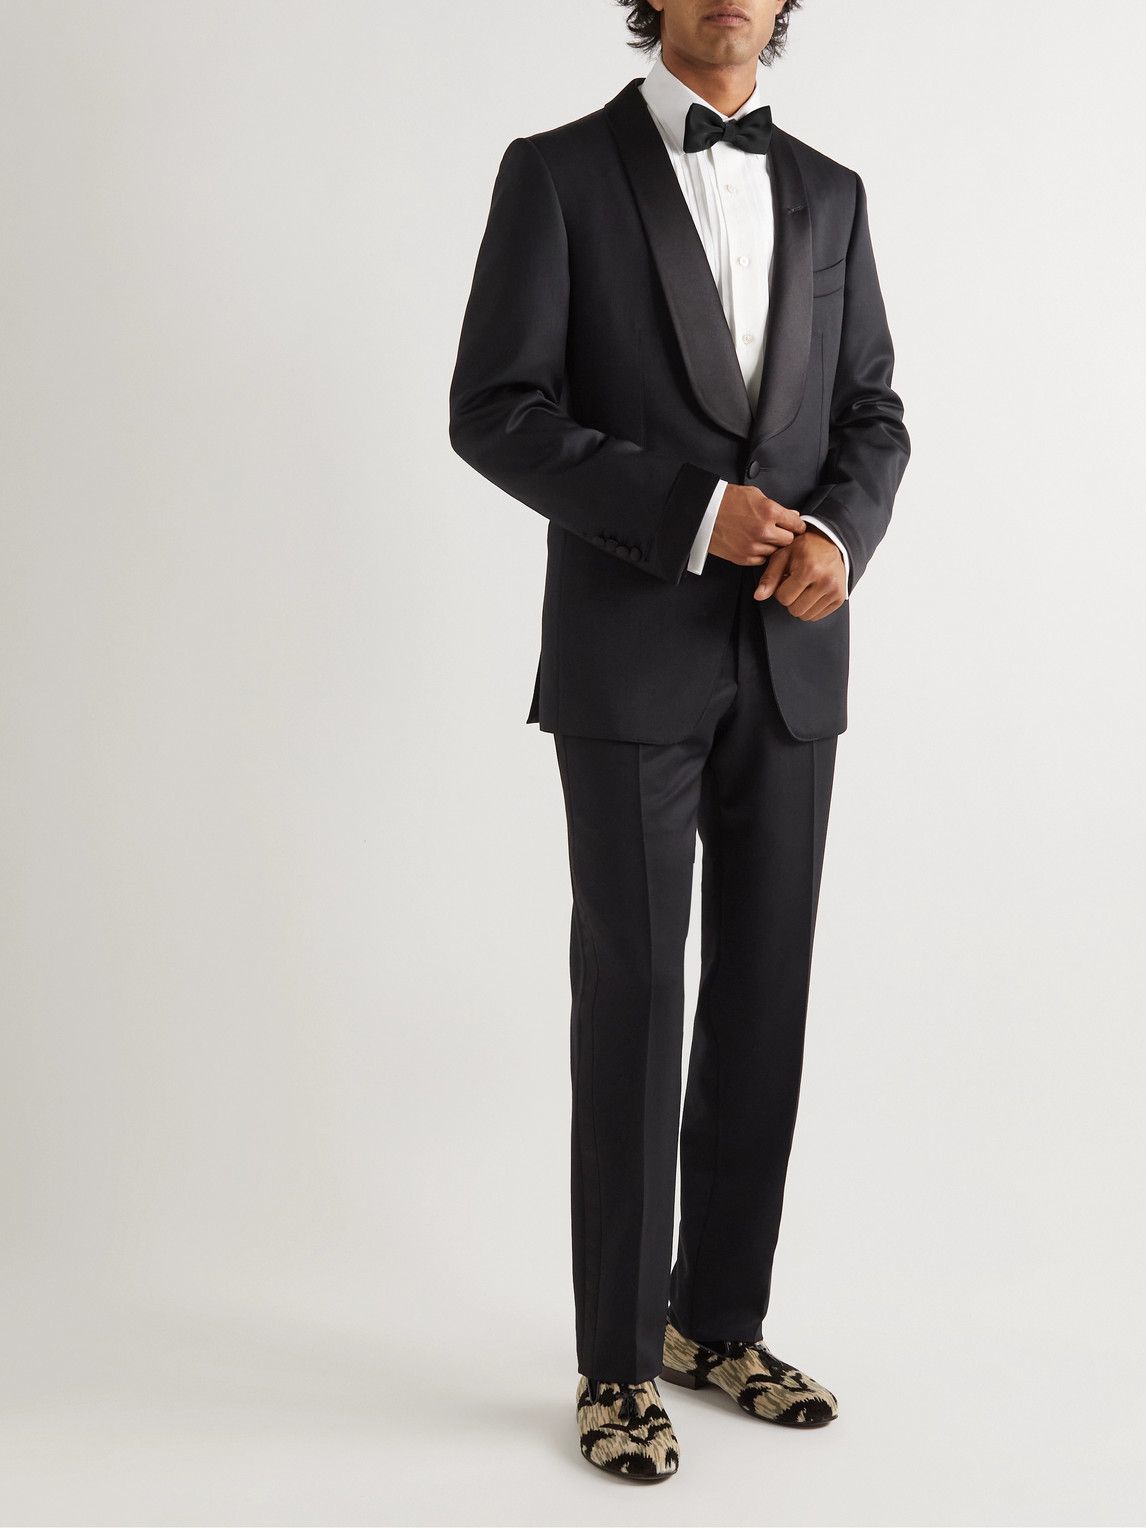 TOM FORD - O'Connor Slim-Fit Grain de Poudre Wool and Mohair-Blend Tuxedo  Jacket - Black TOM FORD